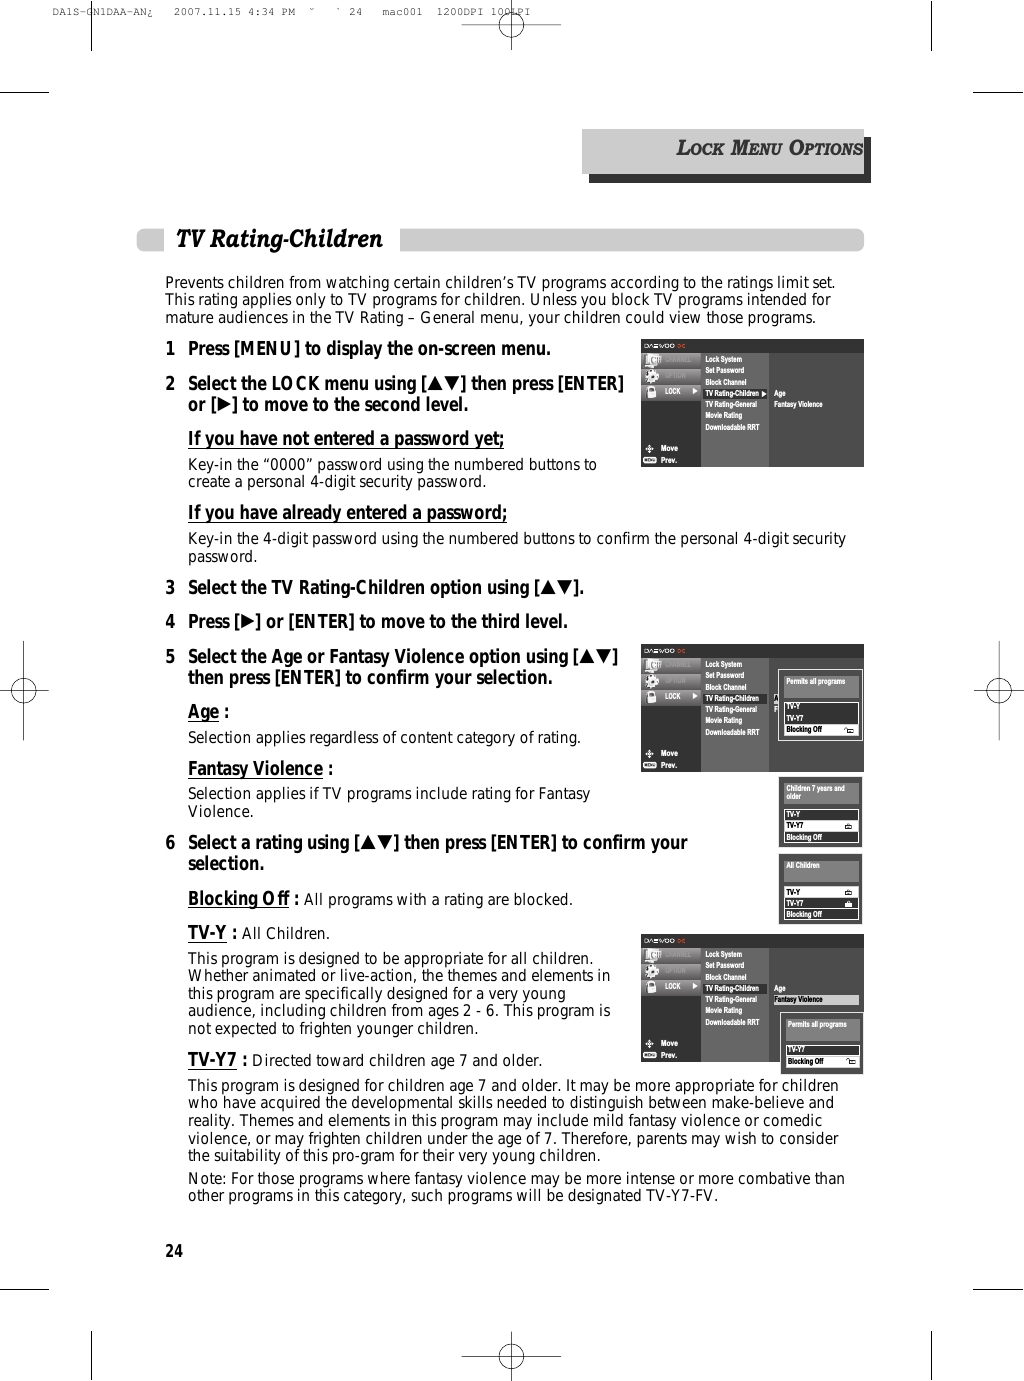 24Prevents children from watching certain children’s TV programs according to the ratings limit set.This rating applies only to TV programs for children. Unless you block TV programs intended formature audiences in the TV Rating – General menu, your children could view those programs.1 Press [MENU] to display the on-screen menu.2 Select the LOCK menu using […†] then press [ENTER]or [√] to move to the second level.If you have not entered a password yet;Key-in the “0000” password using the numbered buttons tocreate a personal 4-digit security password.If you have already entered a password;Key-in the 4-digit password using the numbered buttons to confirm the personal 4-digit securitypassword.3 Select the TV Rating-Children option using […†].4 Press [√] or [ENTER] to move to the third level.5  Select the Age or Fantasy Violence option using […†] then press [ENTER] to confirm your selection.Age : Selection applies regardless of content category of rating.Fantasy Violence : Selection applies if TV programs include rating for FantasyViolence.6 Select a rating using […†] then press [ENTER] to confirm your selection.Blocking Off : All programs with a rating are blocked.TV-Y : All Children.This program is designed to be appropriate for all children.Whether animated or live-action, the themes and elements inthis program are specifically designed for a very youngaudience, including children from ages 2 - 6. This program isnot expected to frighten younger children.TV-Y7 : Directed toward children age 7 and older.This program is designed for children age 7 and older. It may be more appropriate for childrenwho have acquired the developmental skills needed to distinguish between make-believe andreality. Themes and elements in this program may include mild fantasy violence or comedicviolence, or may frighten children under the age of 7. Therefore, parents may wish to considerthe suitability of this pro-gram for their very young children.Note: For those programs where fantasy violence may be more intense or more combative thanother programs in this category, such programs will be designated TV-Y7-FV.TV Rating-ChildrenMovePrev.CHANNELOPTIONLOCK √√Lock SystemSet PasswordBlock ChannelTV Rating-ChildrenTV Rating-GeneralMovie RatingDownloadable RRTAgeFantasy ViolenceMovePrev.CHANNELOPTIONLOCK √Lock SystemSet PasswordBlock ChannelTV Rating-ChildrenTV Rating-GeneralMovie RatingDownloadable RRTAgeFantasy ViolenceTV-YTV-Y7Blocking OffPermits all programsMovePrev.CHANNELOPTIONLOCK √Lock SystemSet PasswordBlock ChannelTV Rating-ChildrenTV Rating-GeneralMovie RatingDownloadable RRTAgeFantasy ViolenceTV-YTV-Y7Blocking OffChildren 7 years andolderTV-YTV-Y7Blocking OffAll Children LOCKMENUOPTIONSTV-Y7Blocking OffPermits all programsDA1S-GN1DAA-AN¿   2007.11.15 4:34 PM  ˘ ` 24   mac001  1200DPI 100LPI